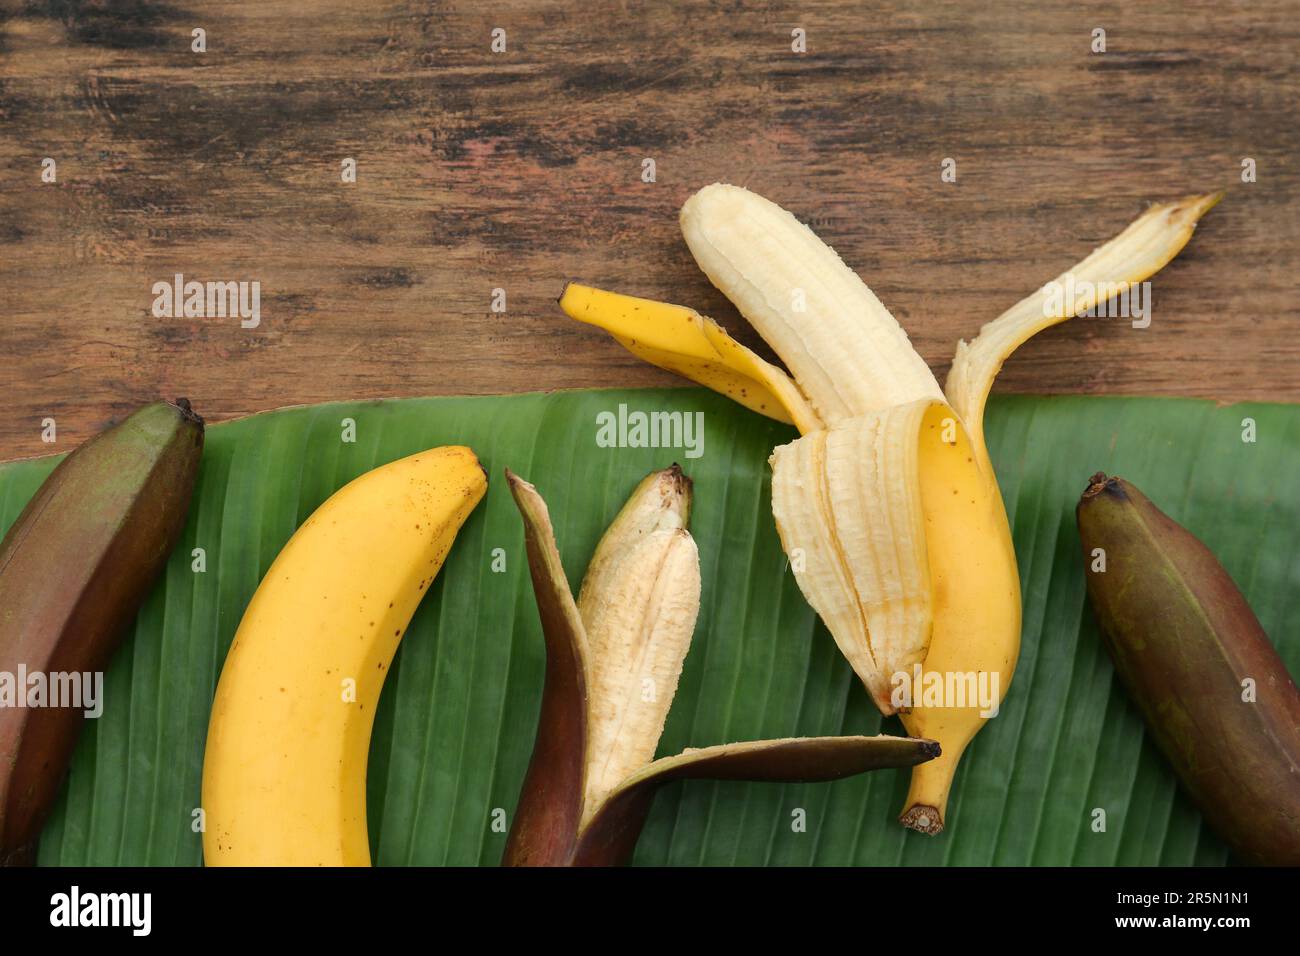 Different types of bananas and fresh leaf on wooden table, flat lay Stock Photo